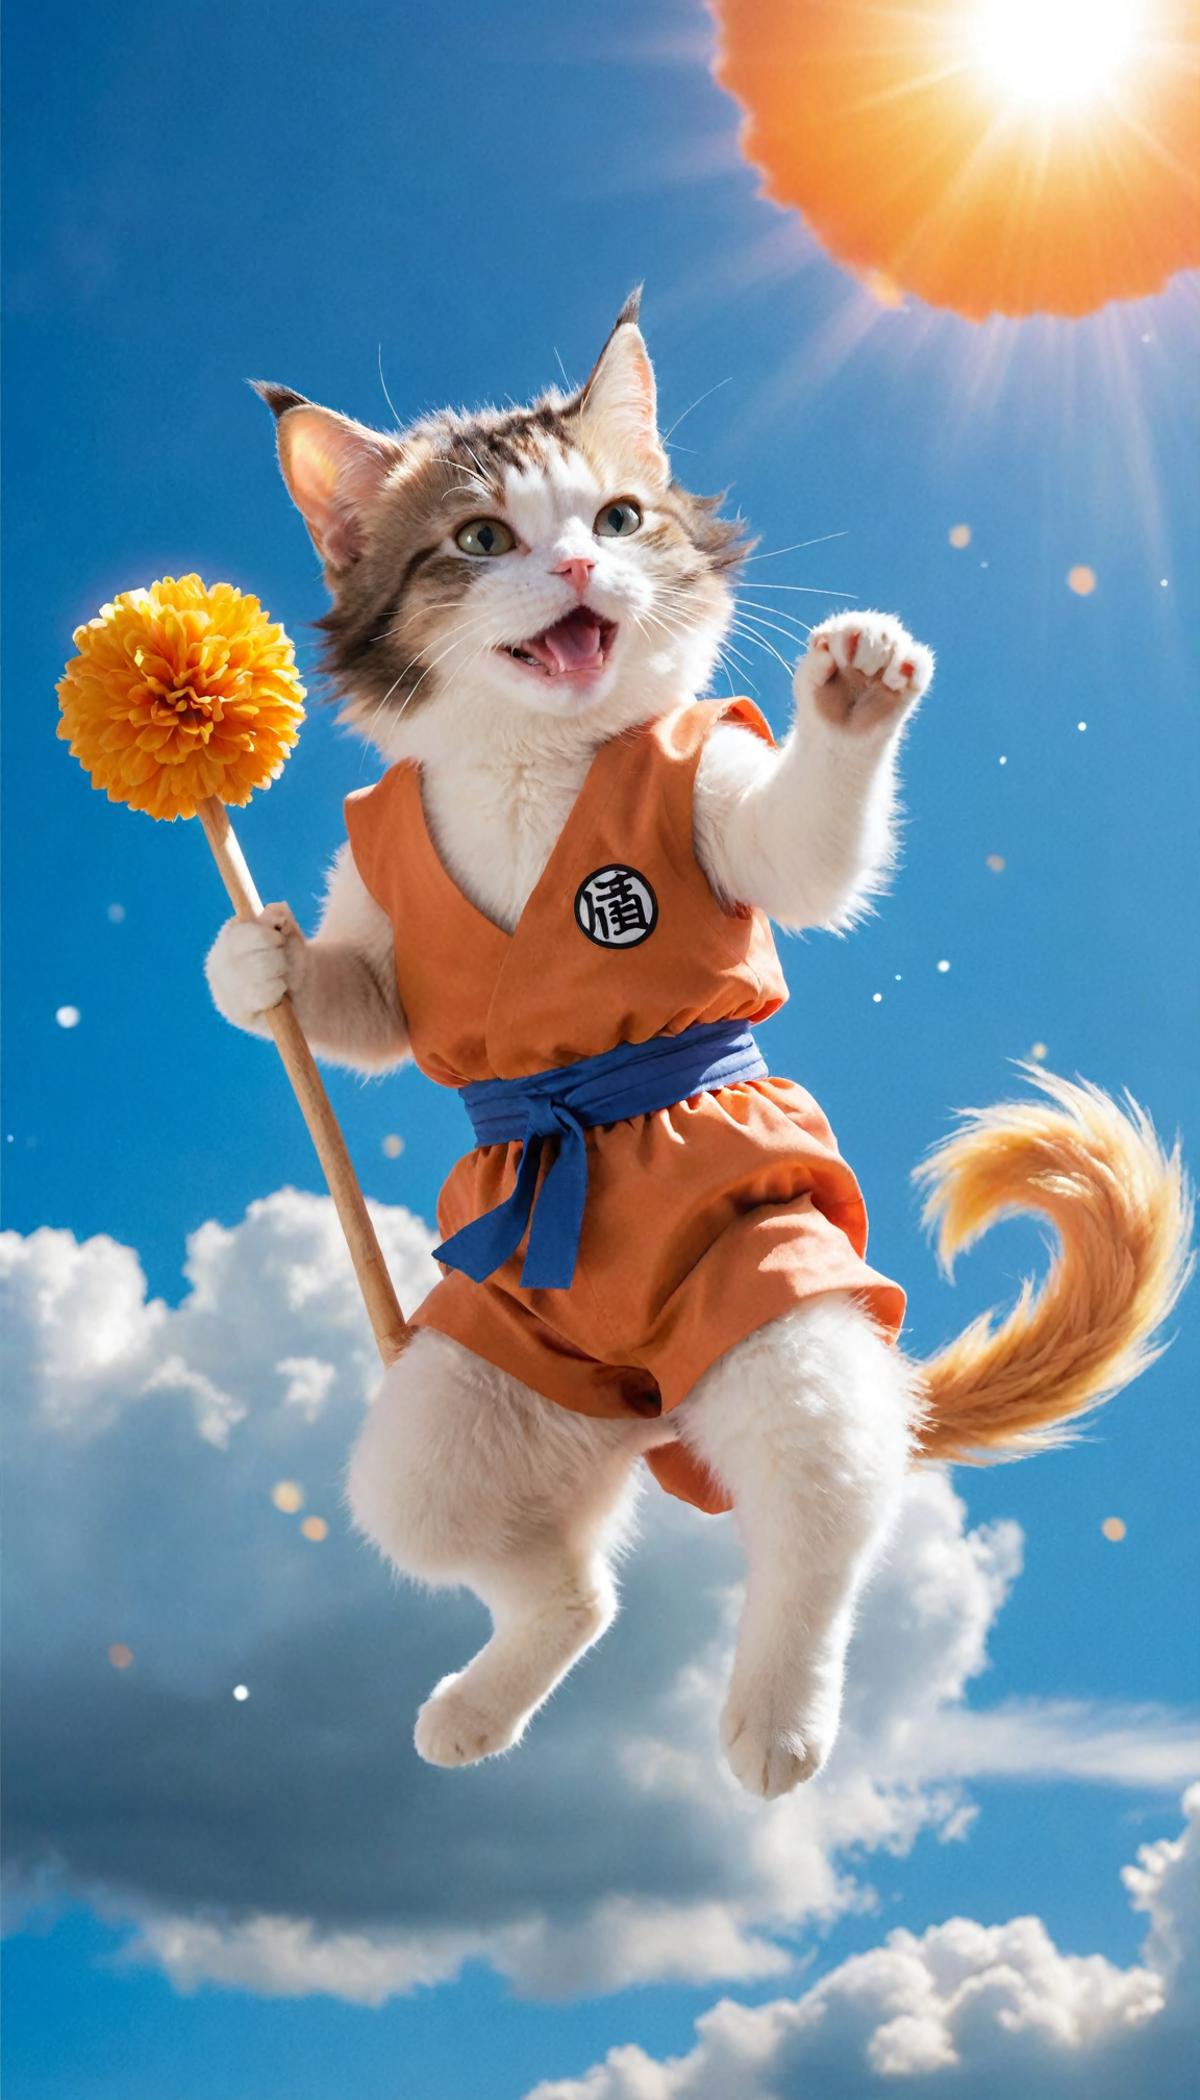 A kitten wearing a martial arts uniform and holding a yellow flower.